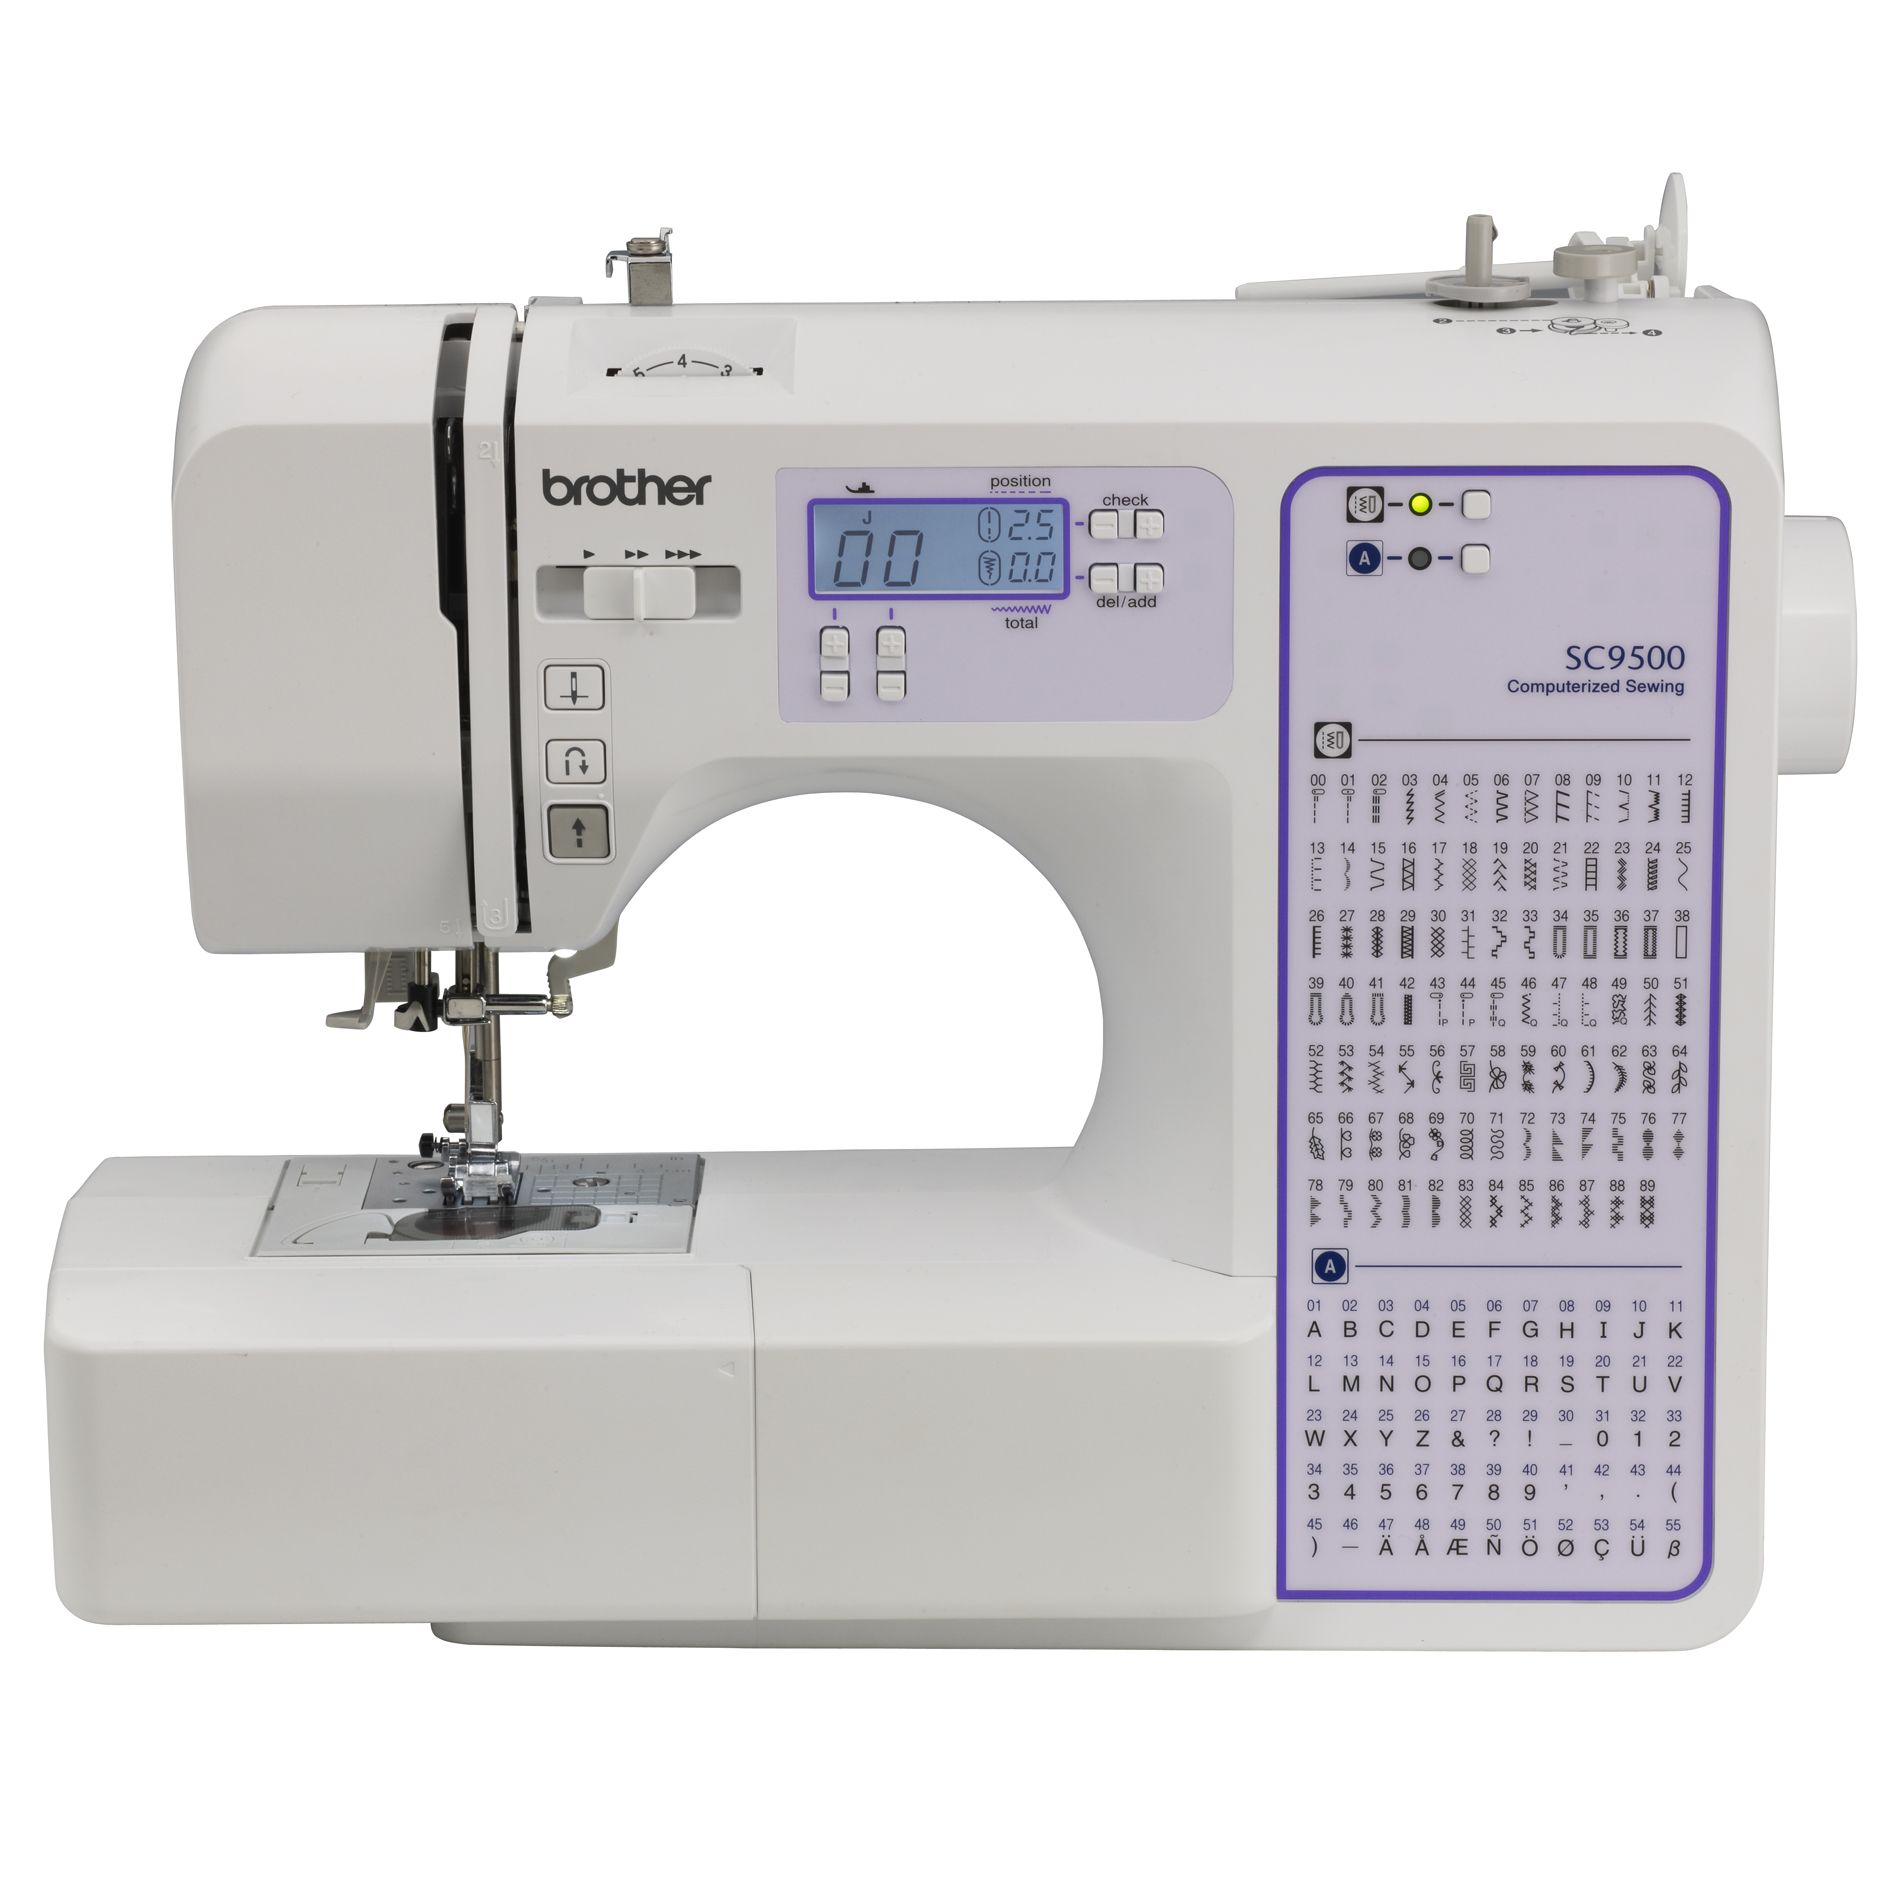 Everything You Need in a Sewing Machine: Made Easy from Kmart